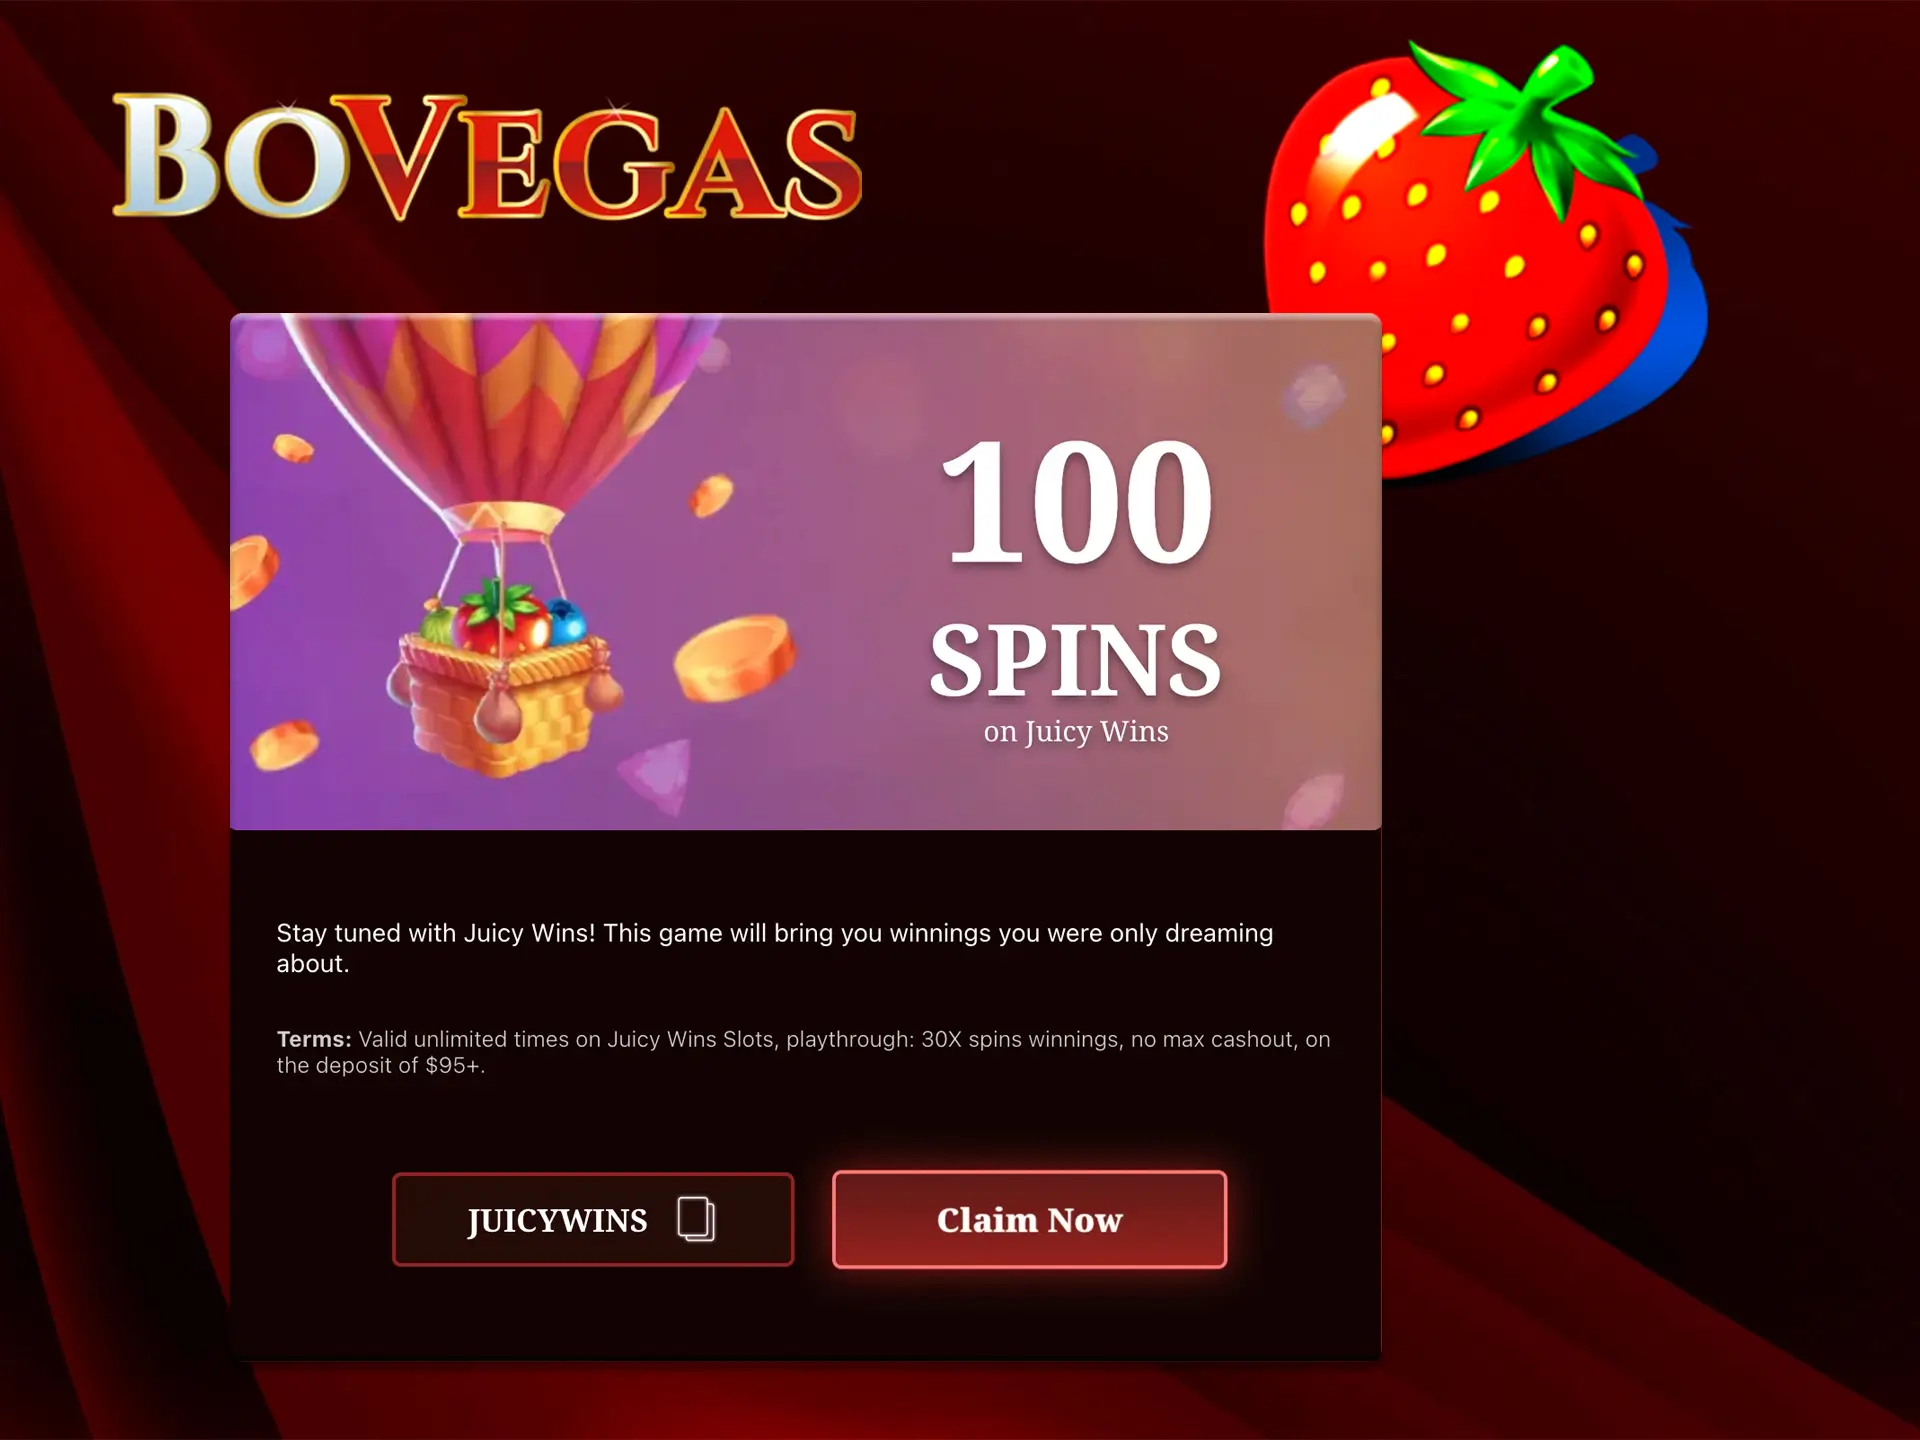 Look for strawberries in BoVegas' Juicy slot and don't forget the promo code that will give you 100 free spins.